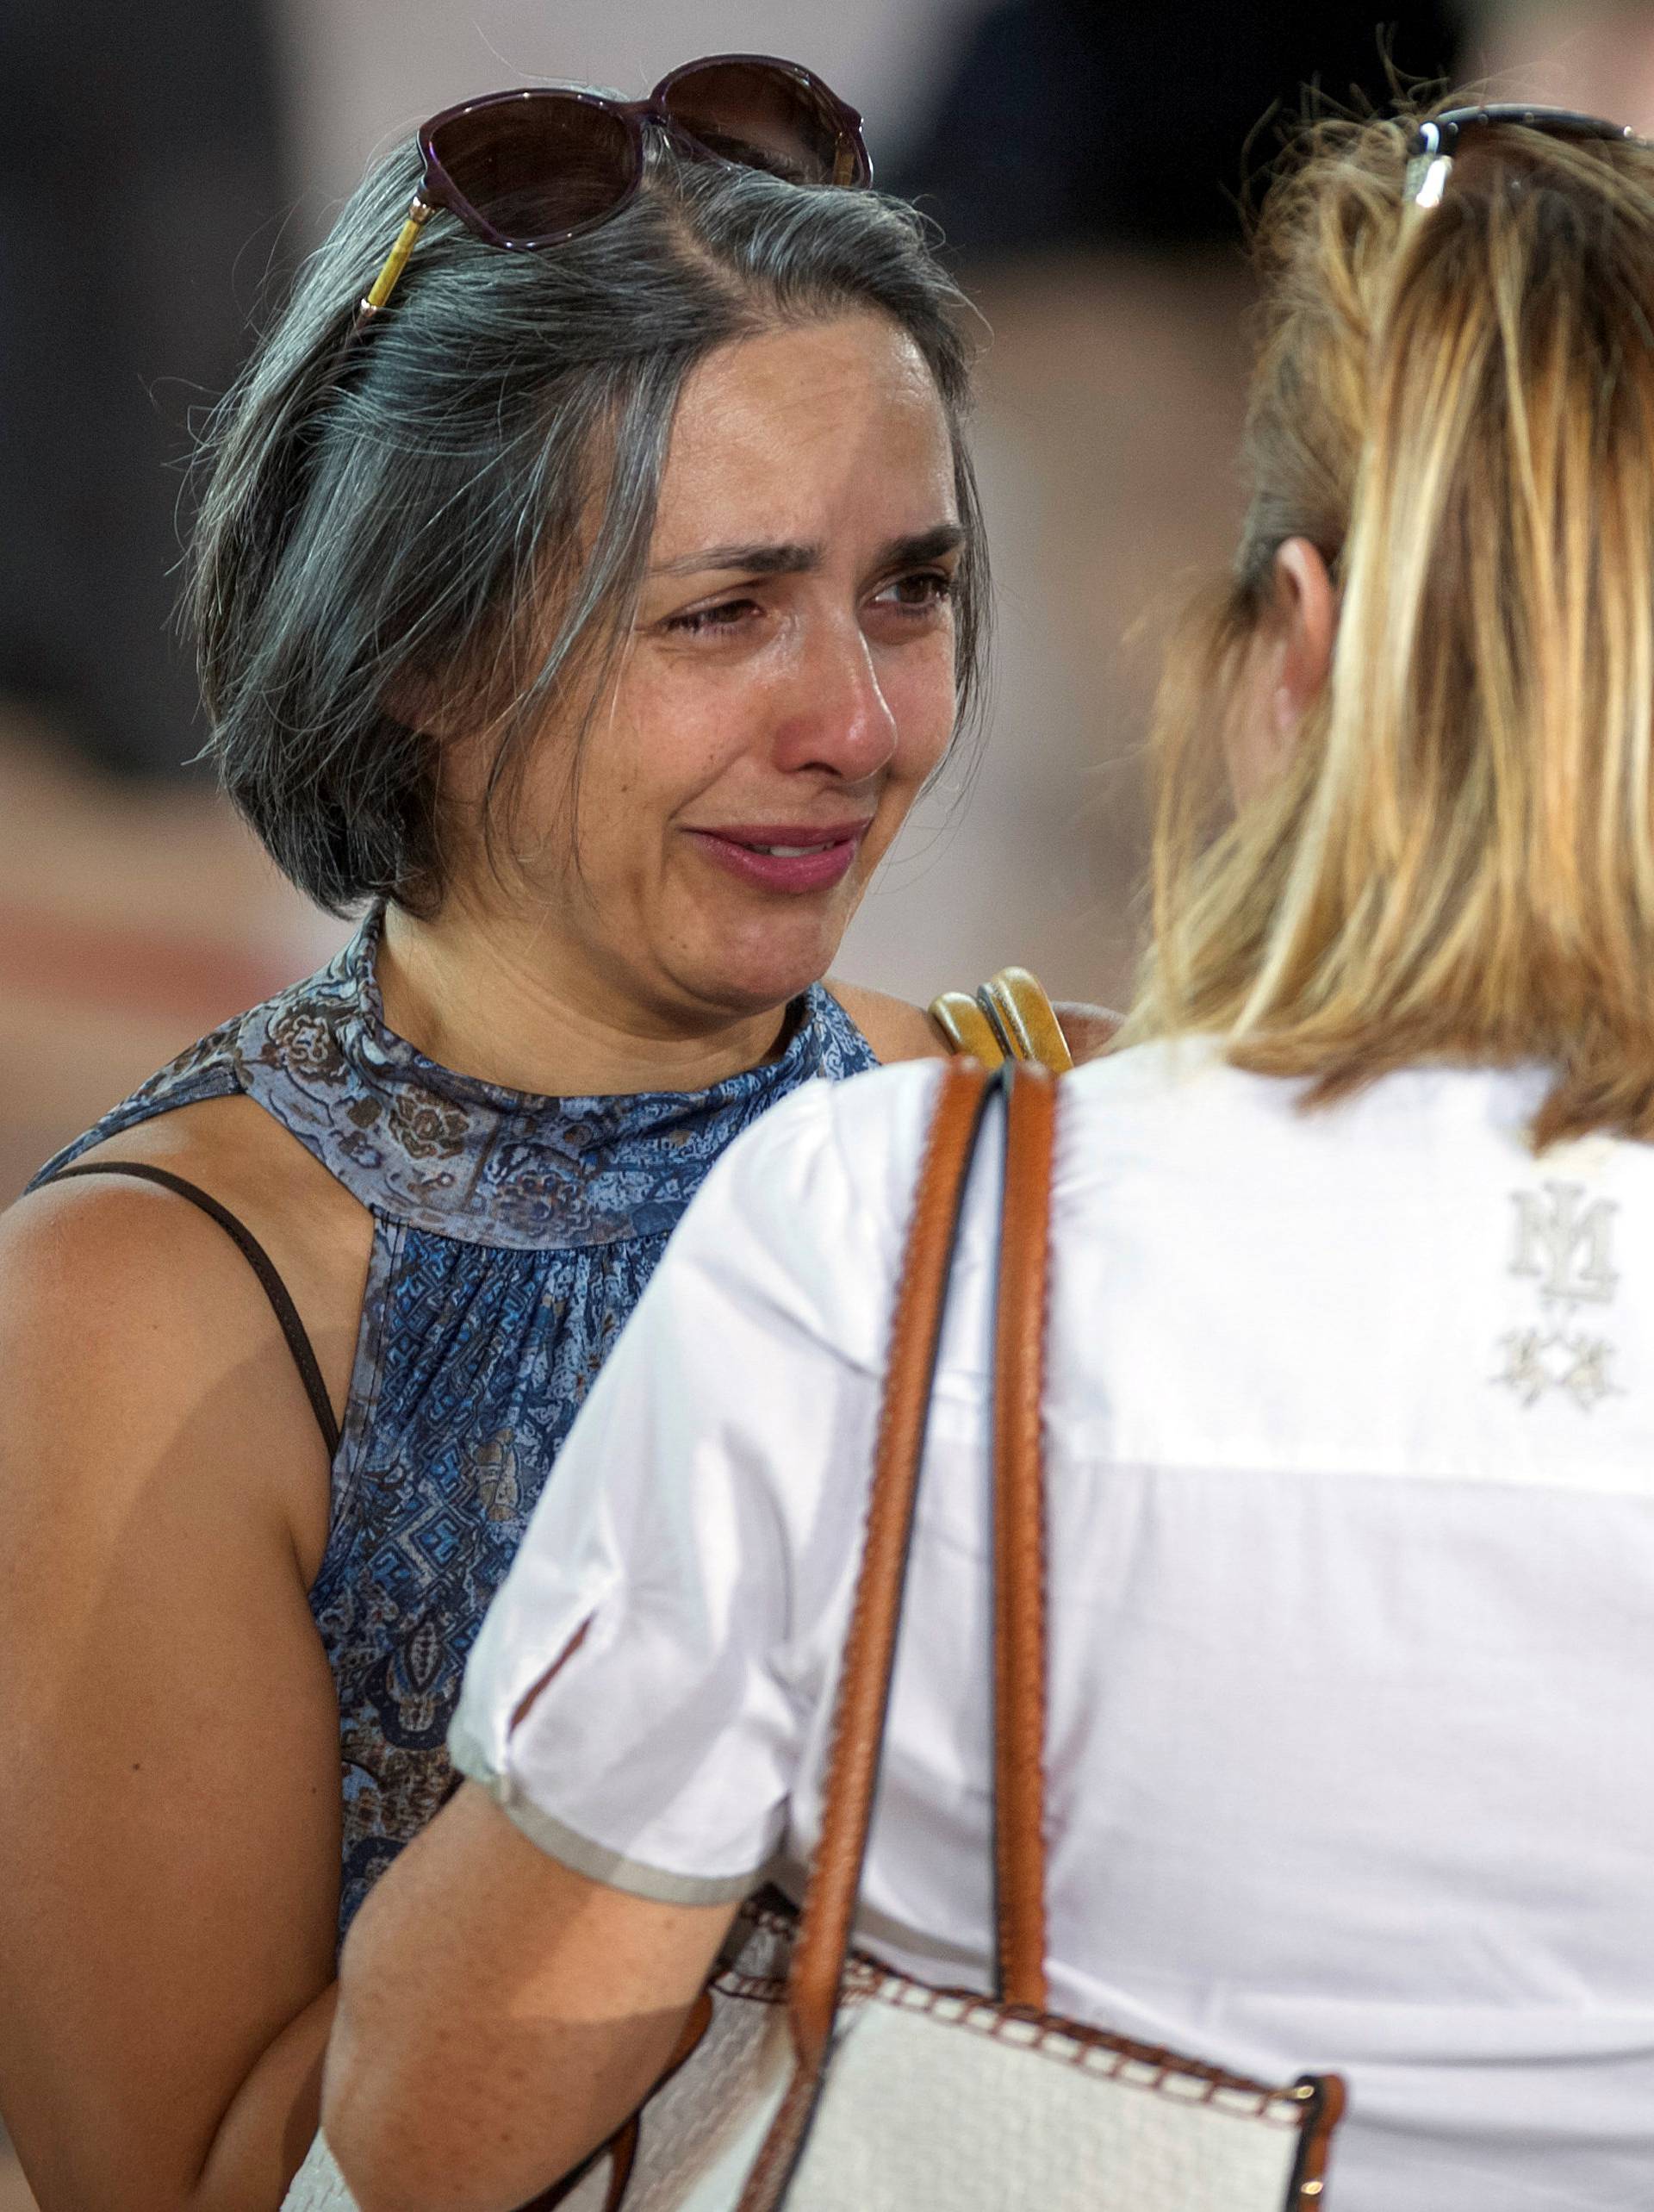 A woman cries after a funeral service for victims of the earthquake inside a gym in Ascoli Piceno